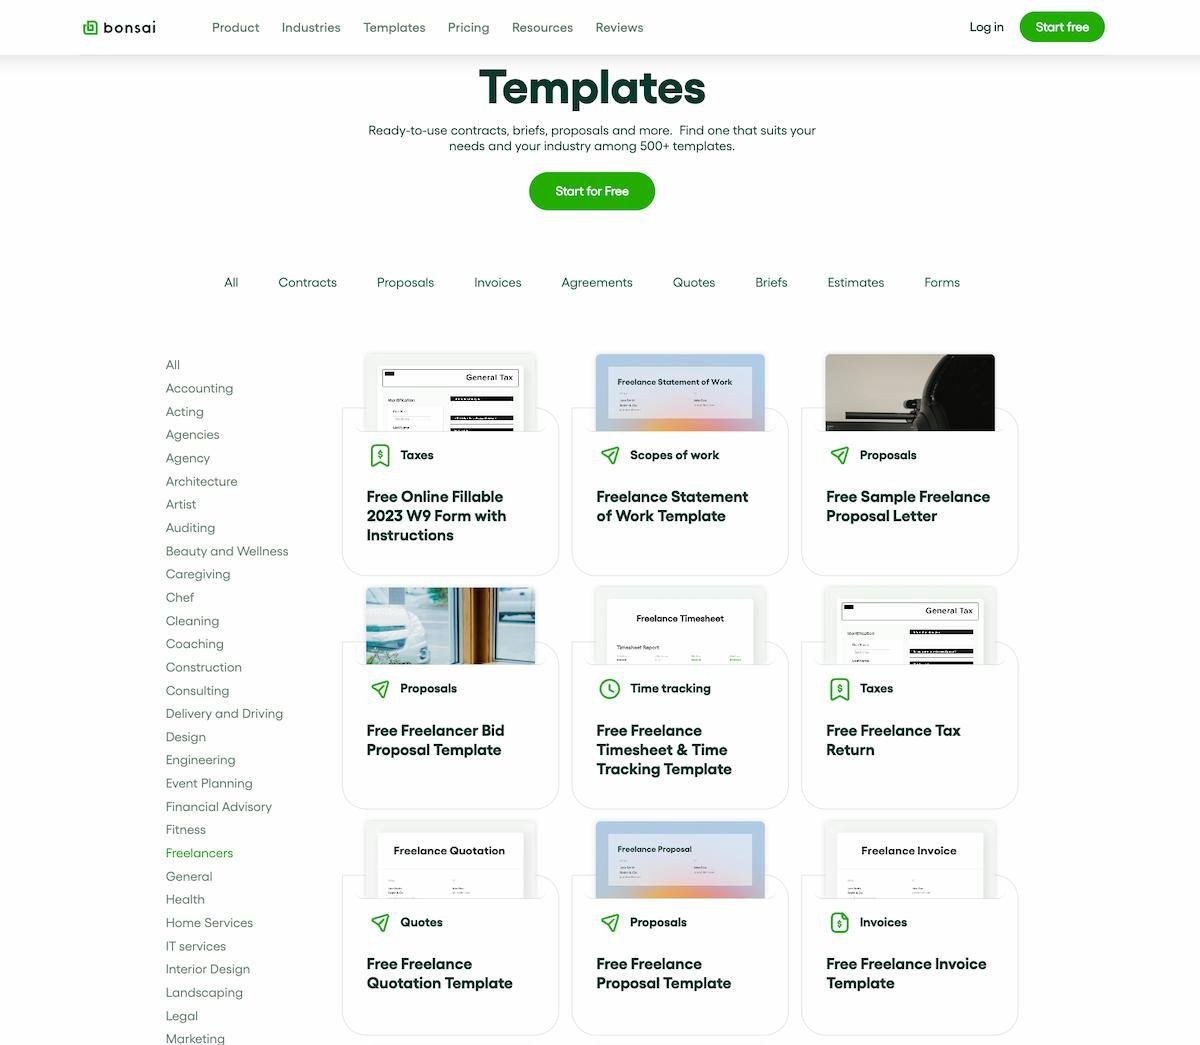 Bonsai templates page showing contract templates for freelancers.